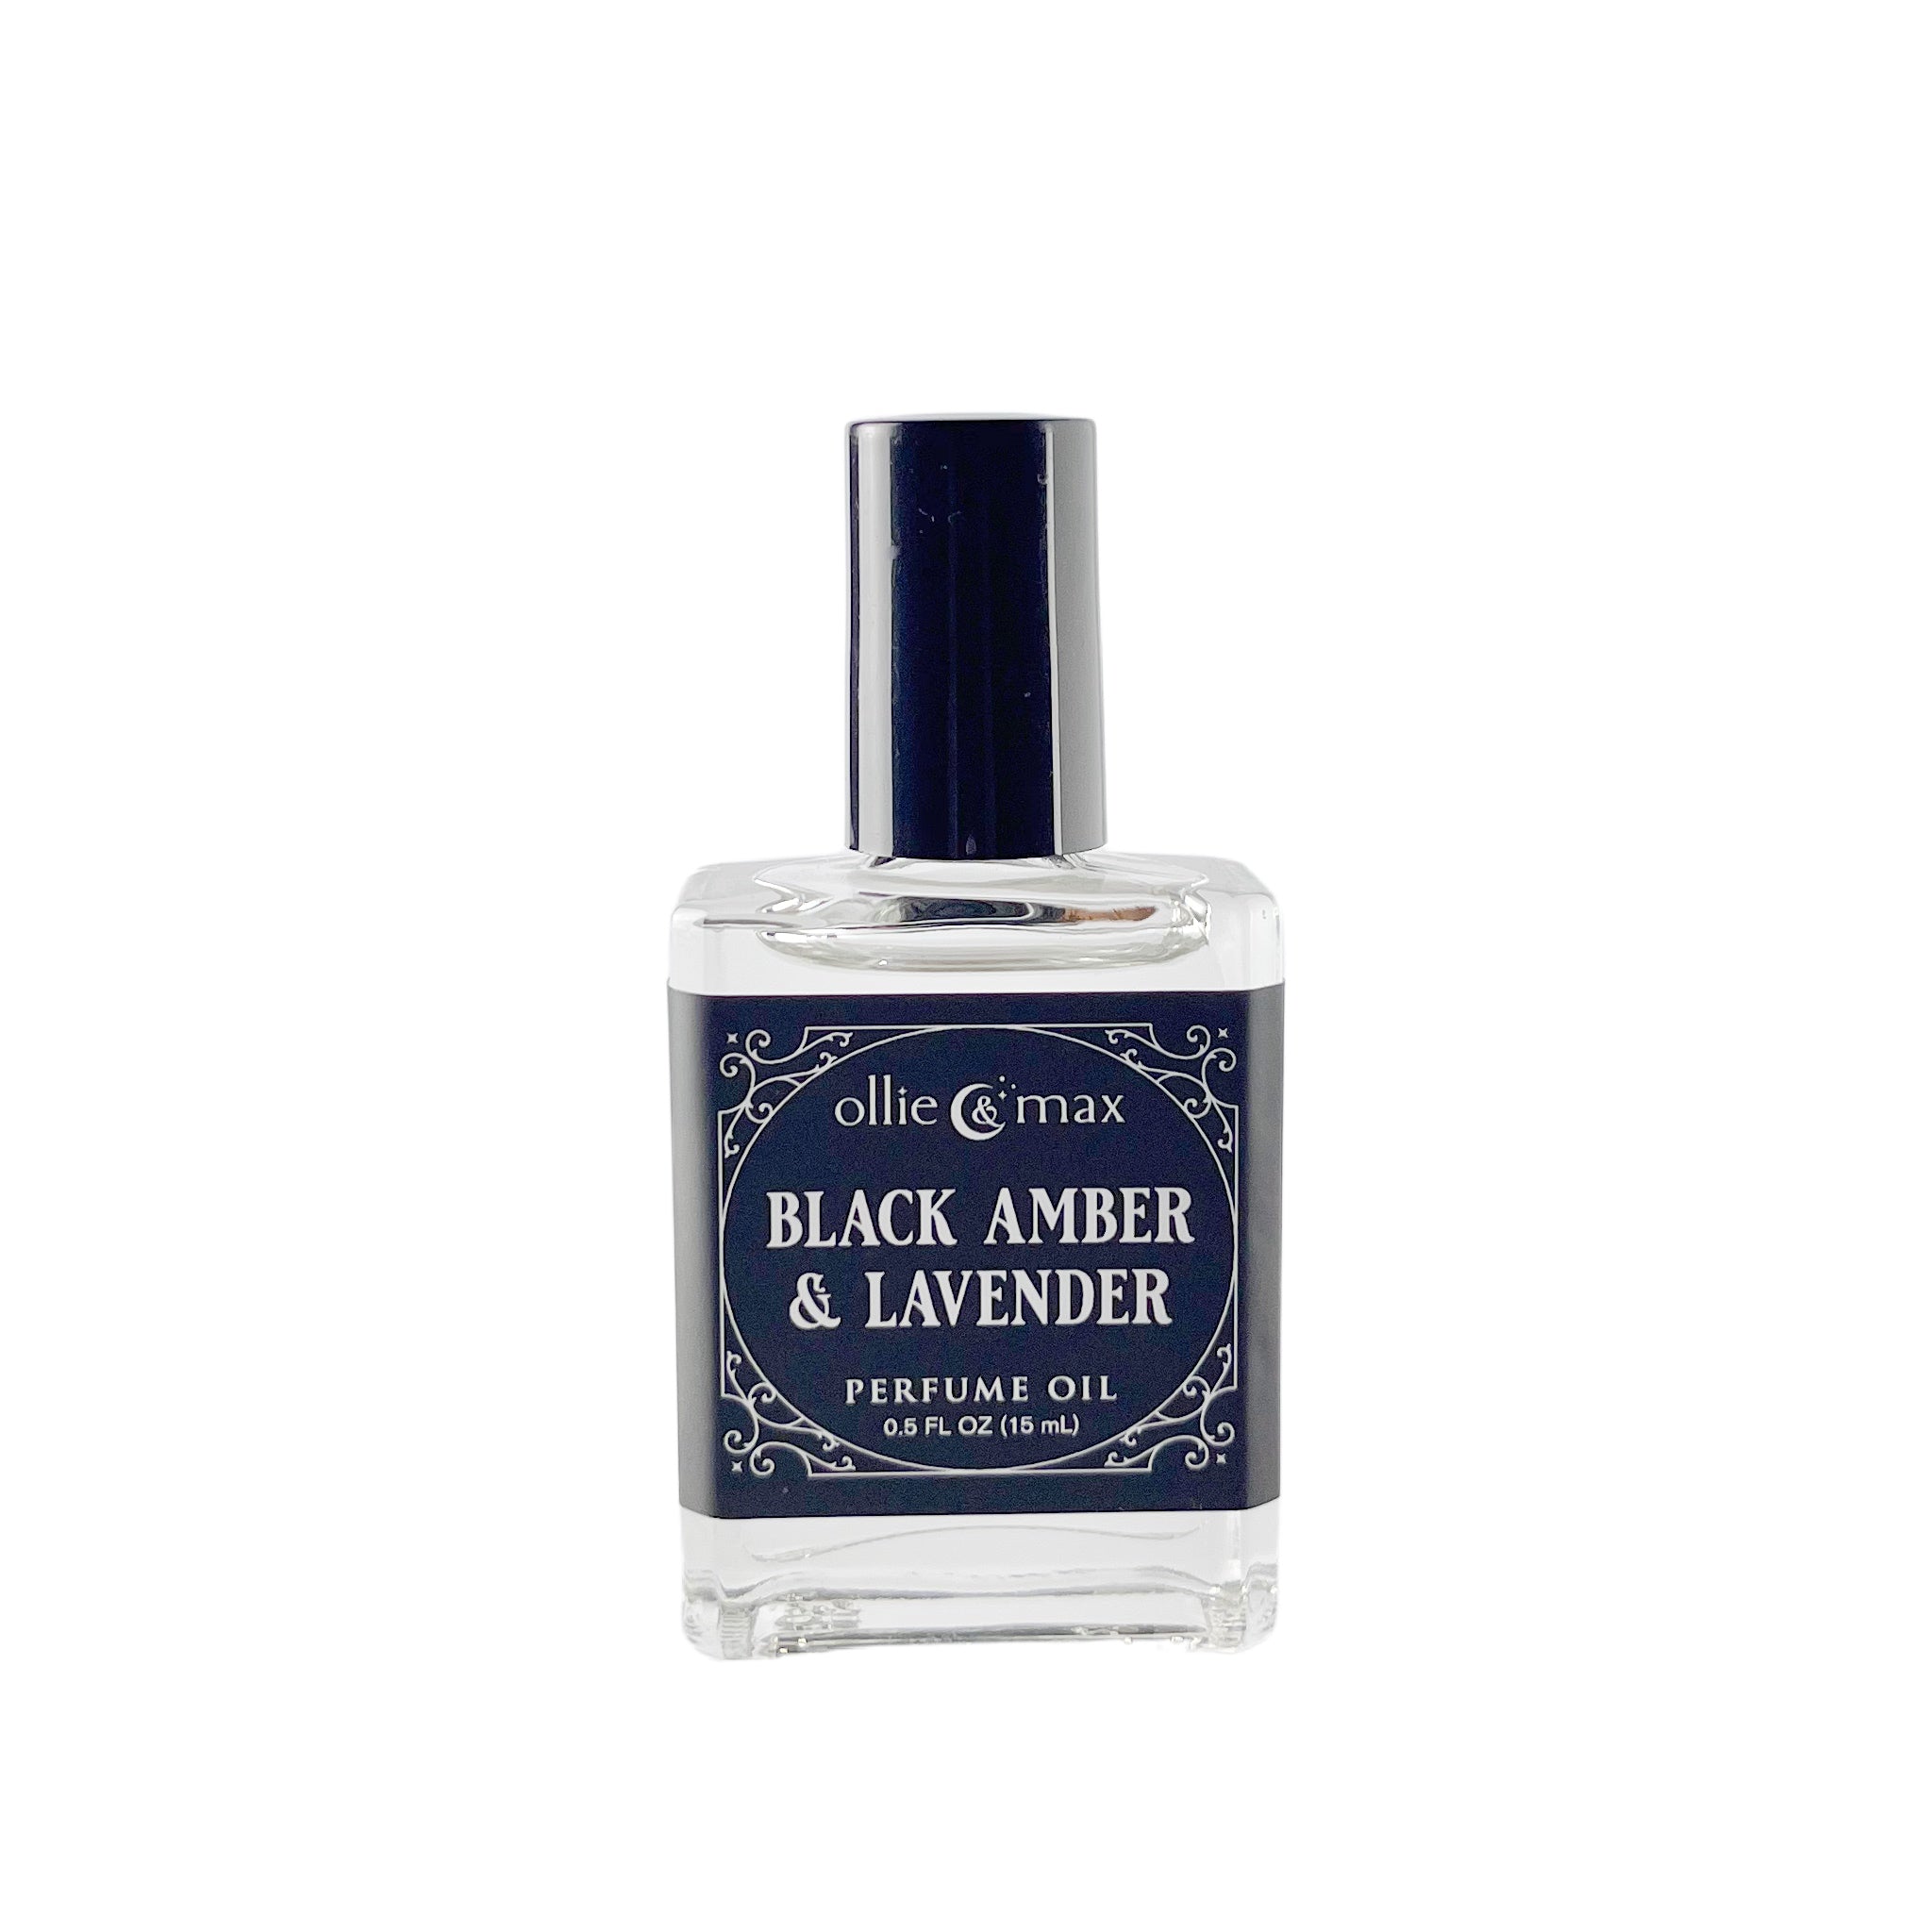 rectangular glass bottle with a black cap and black label, black amber and lavender perfume oil, vegan, 15ml